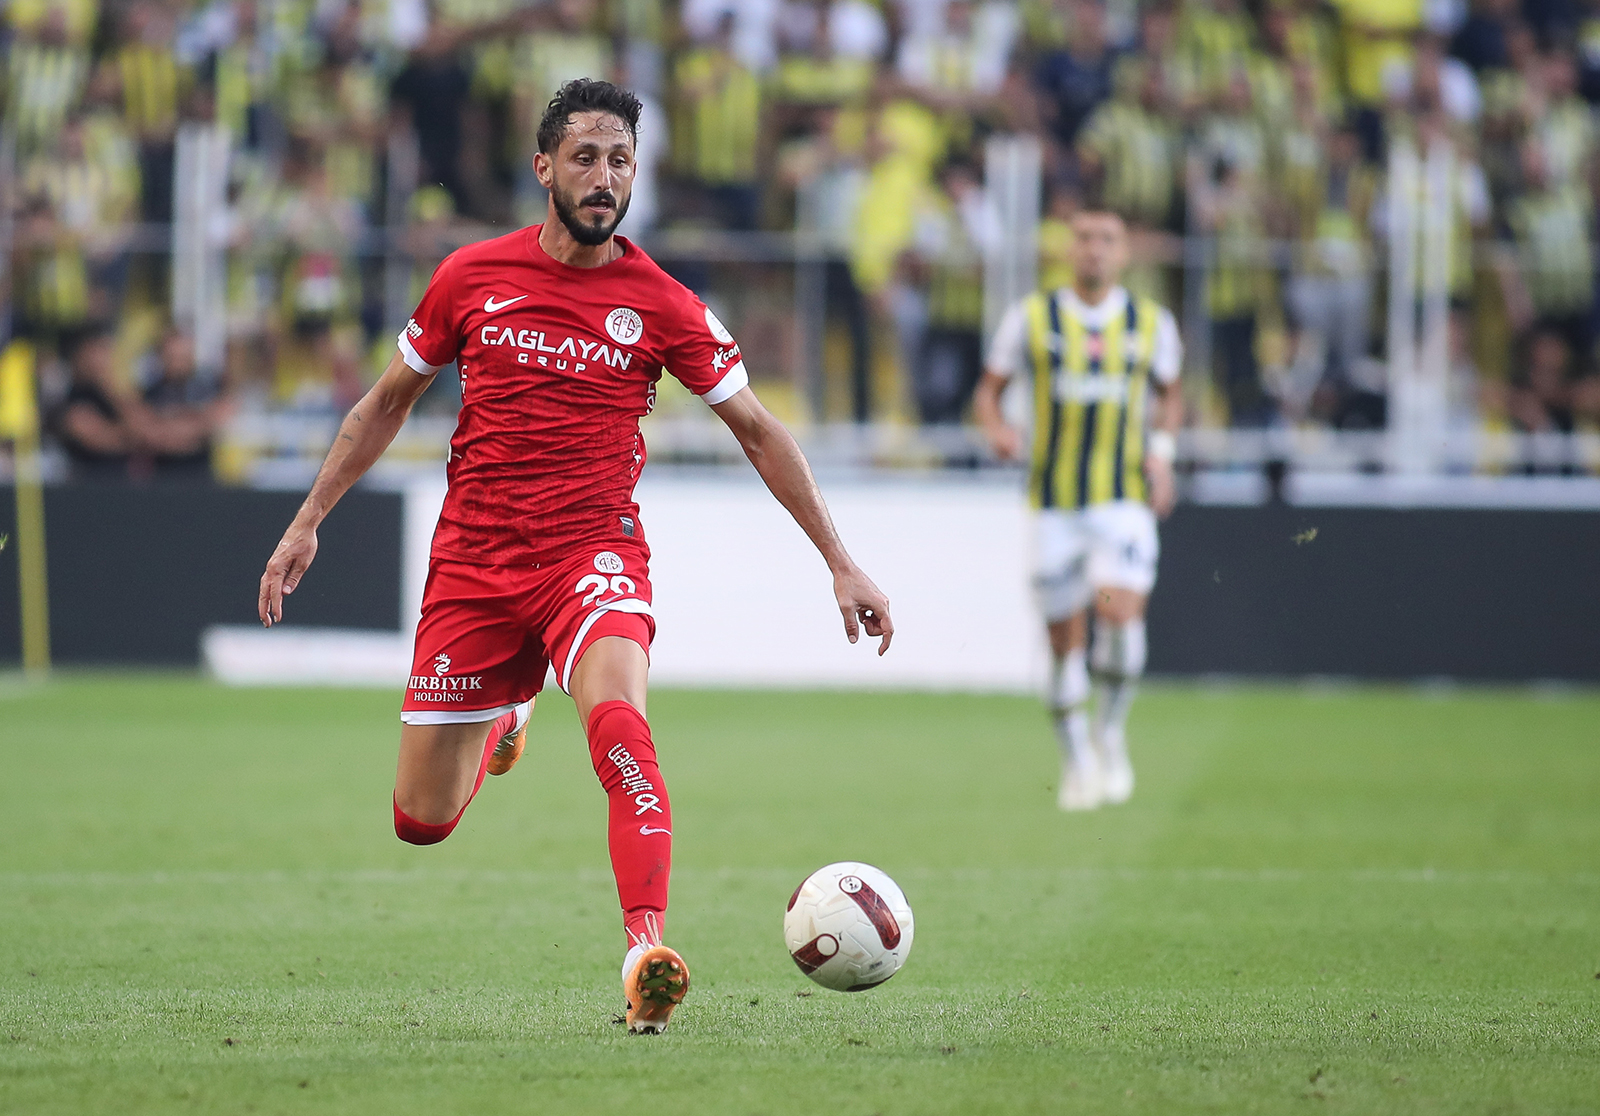 Sagiv Jehezkel of Antalyaspor in action away to Fenerbahce during a Turkish Super League match on September 17, 2023.